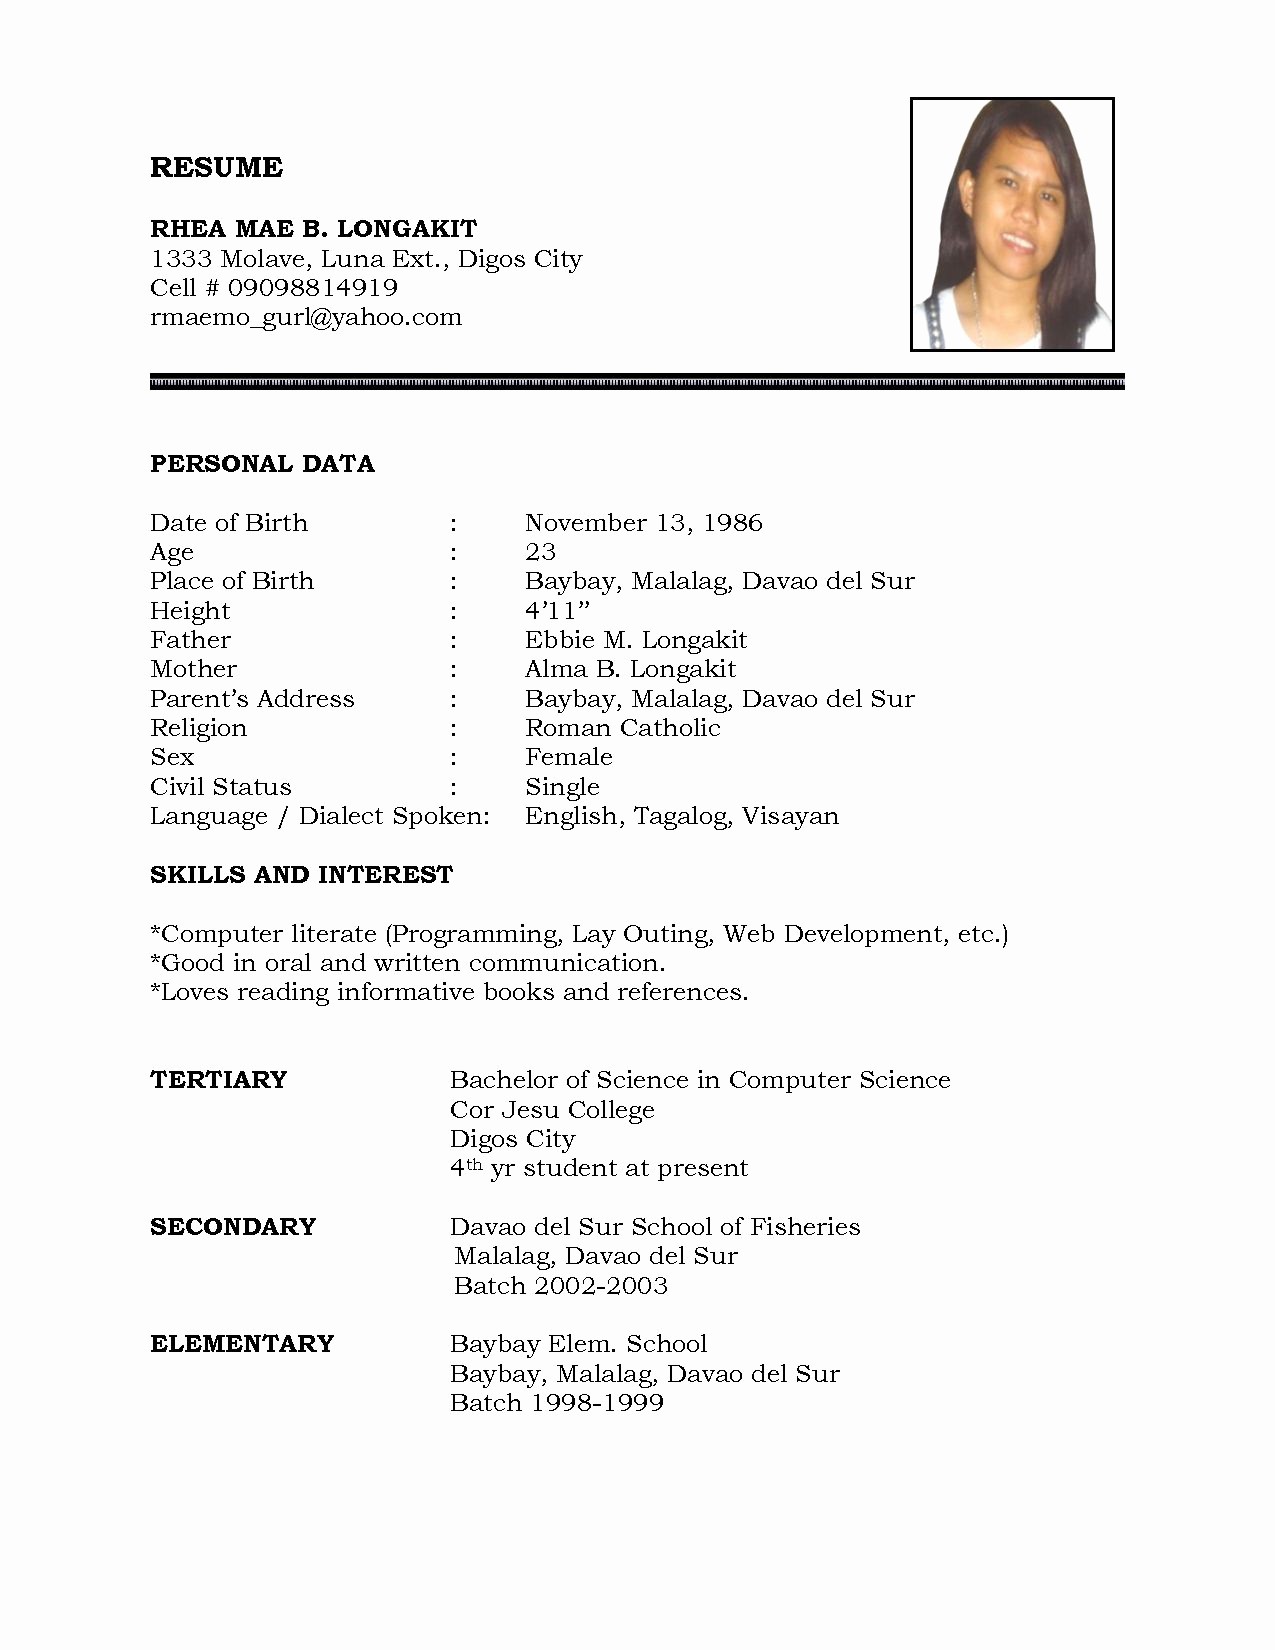 Free and Easy Resume Templates Elegant Resume Sample Simple De9e2a60f the Simple format Resume